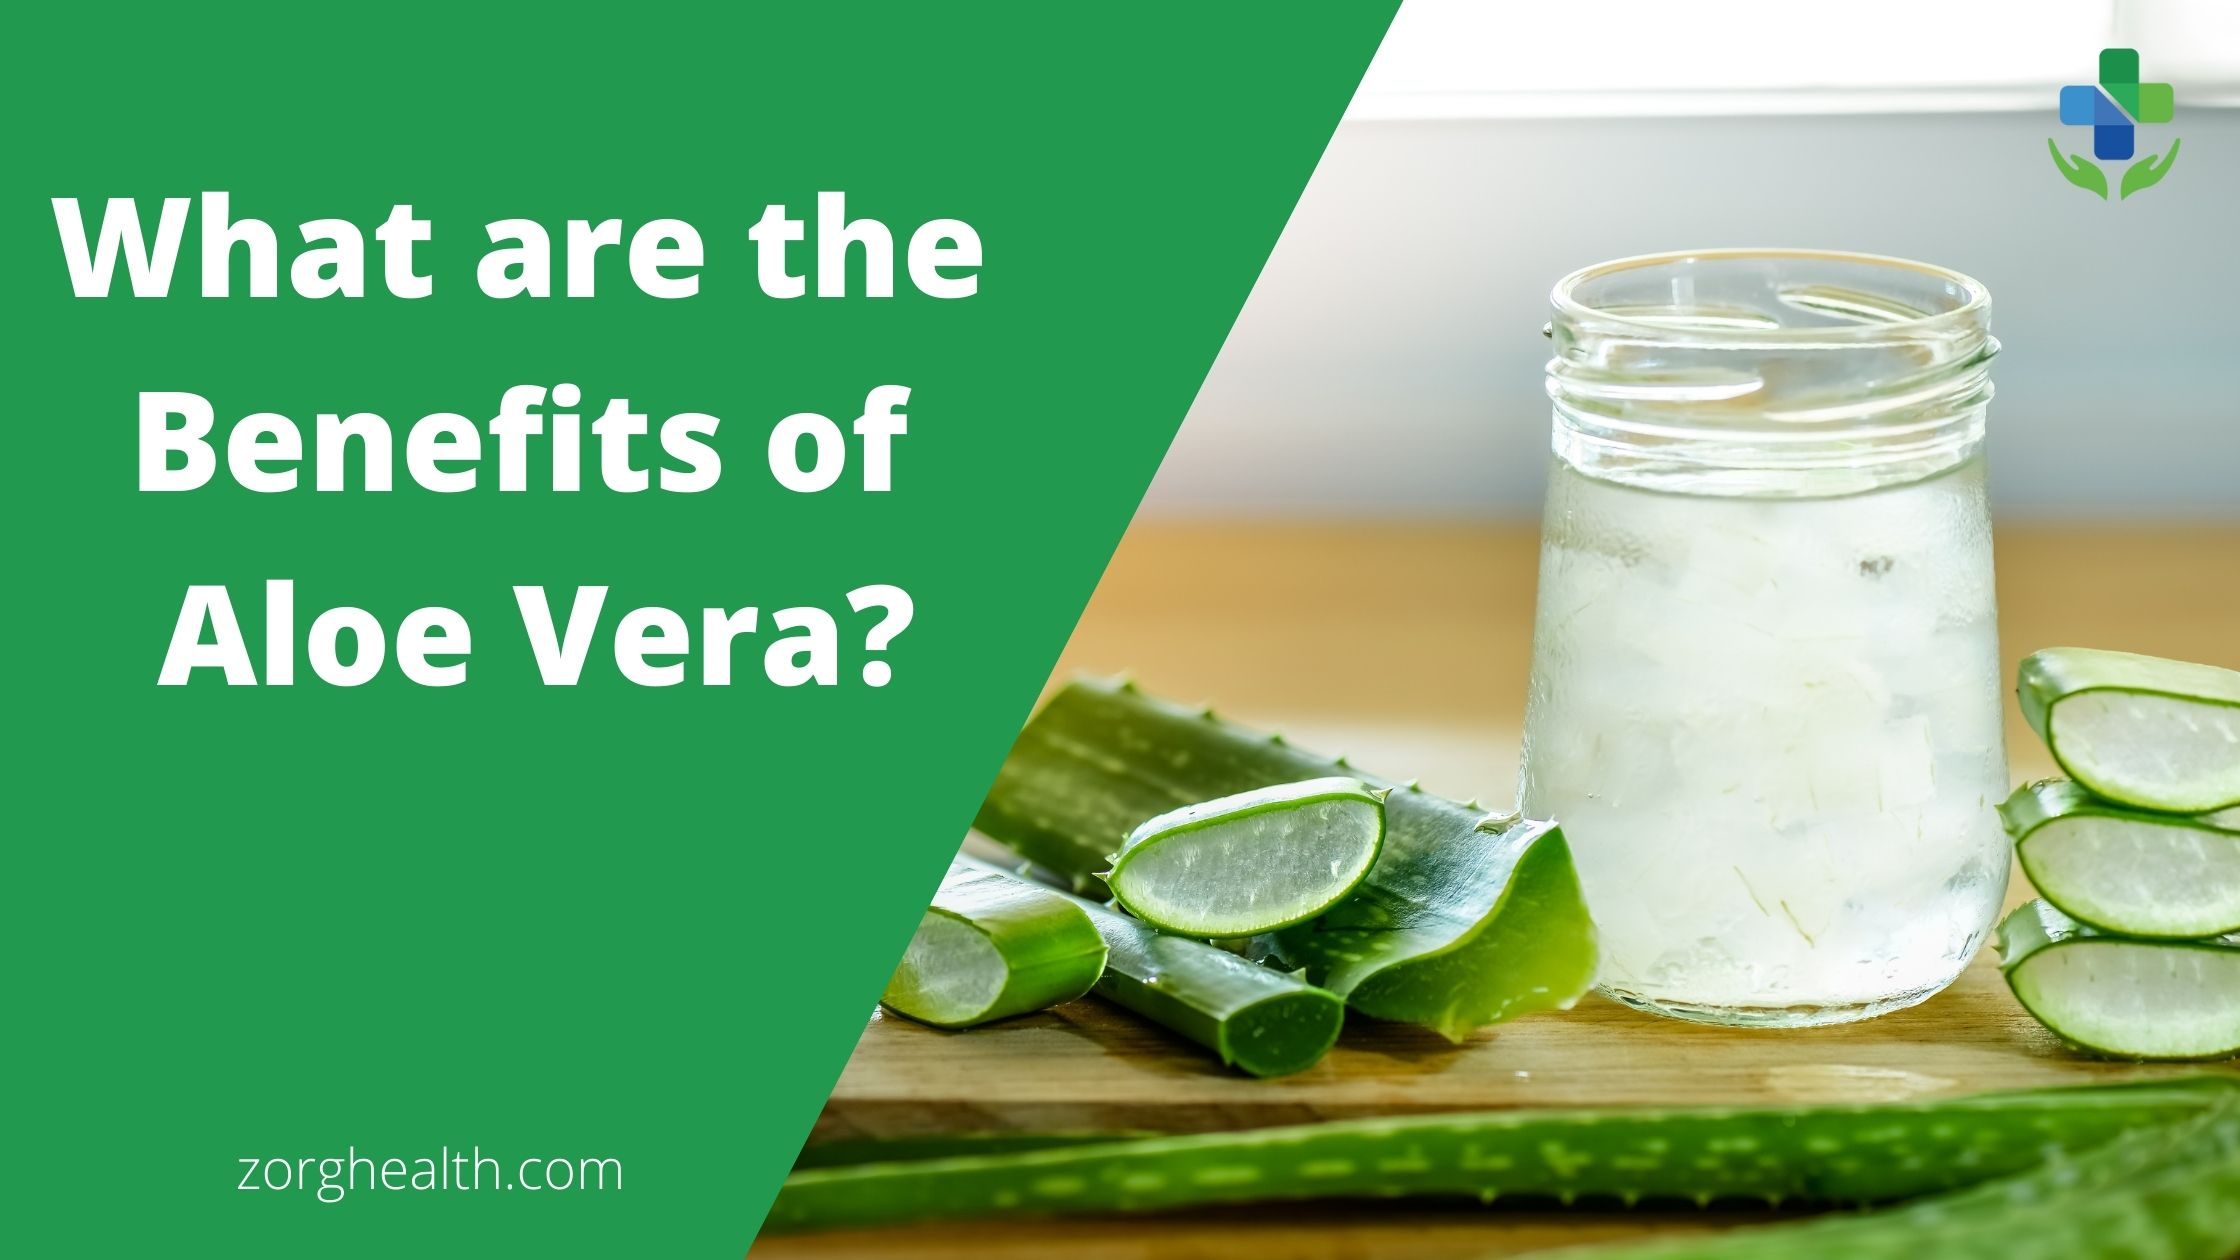 What are the benefits of Aloe Vera